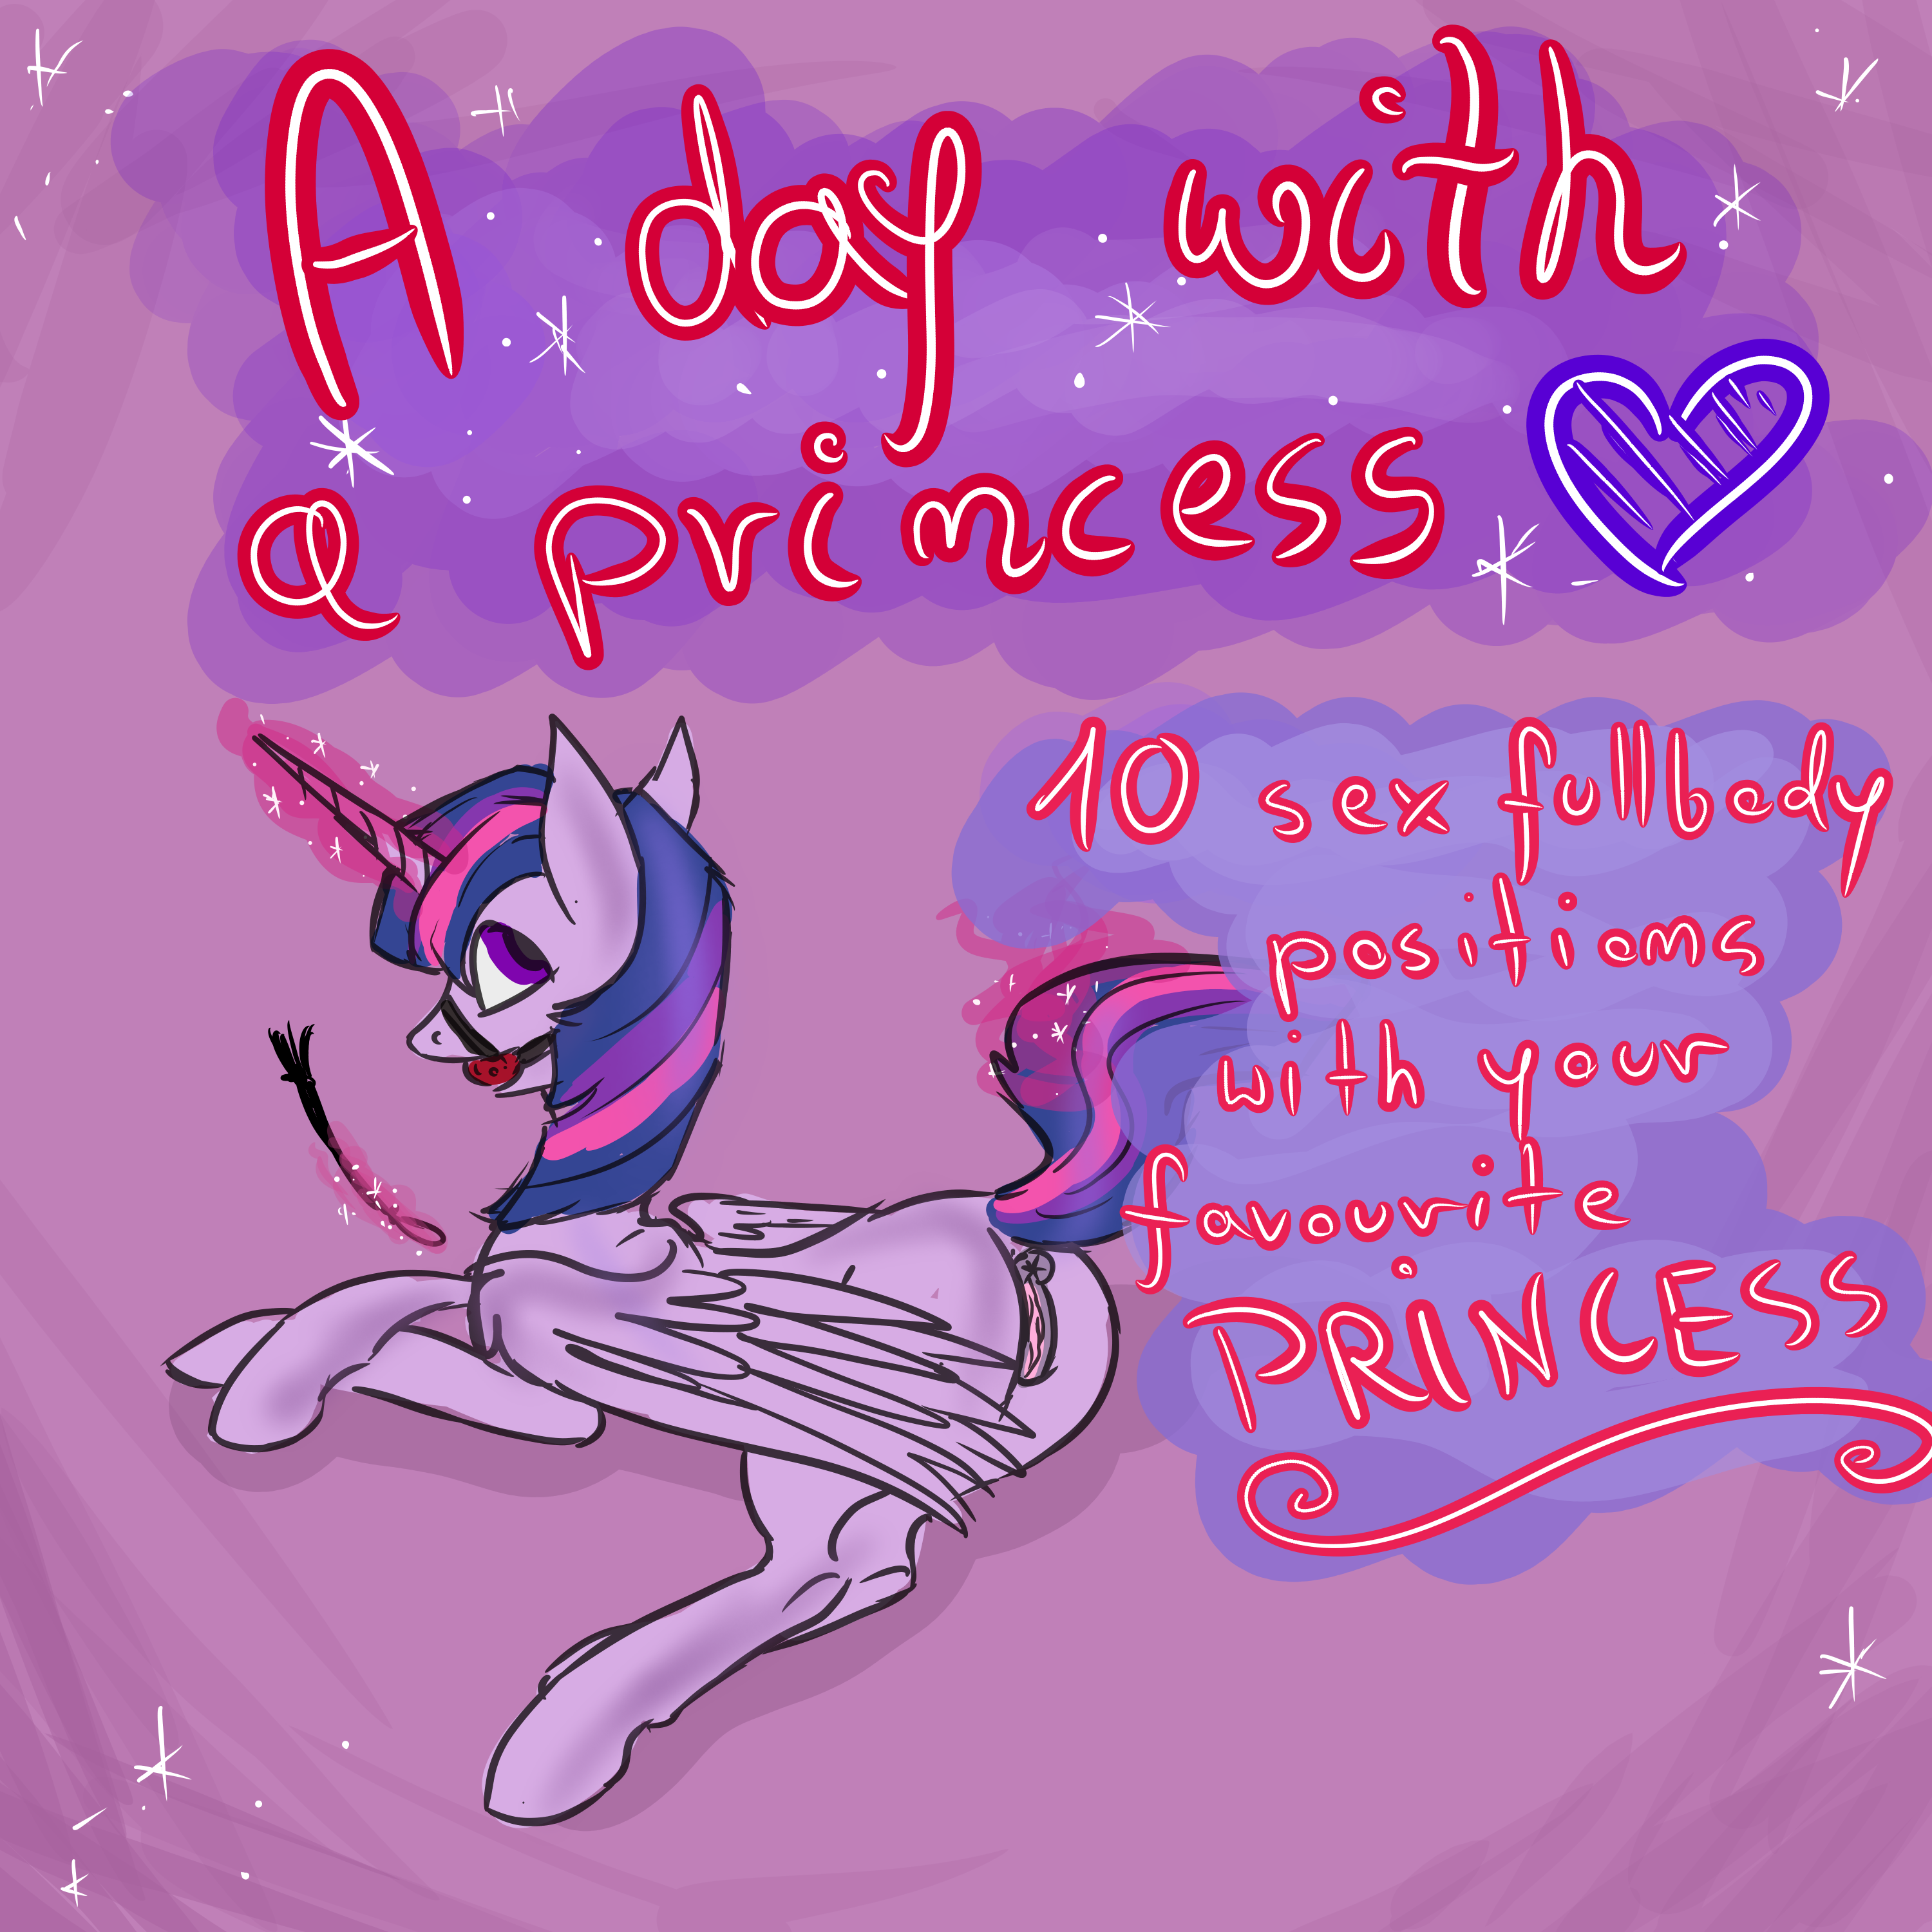 A day with a princess ( Sex positions) - YCH.Commishes